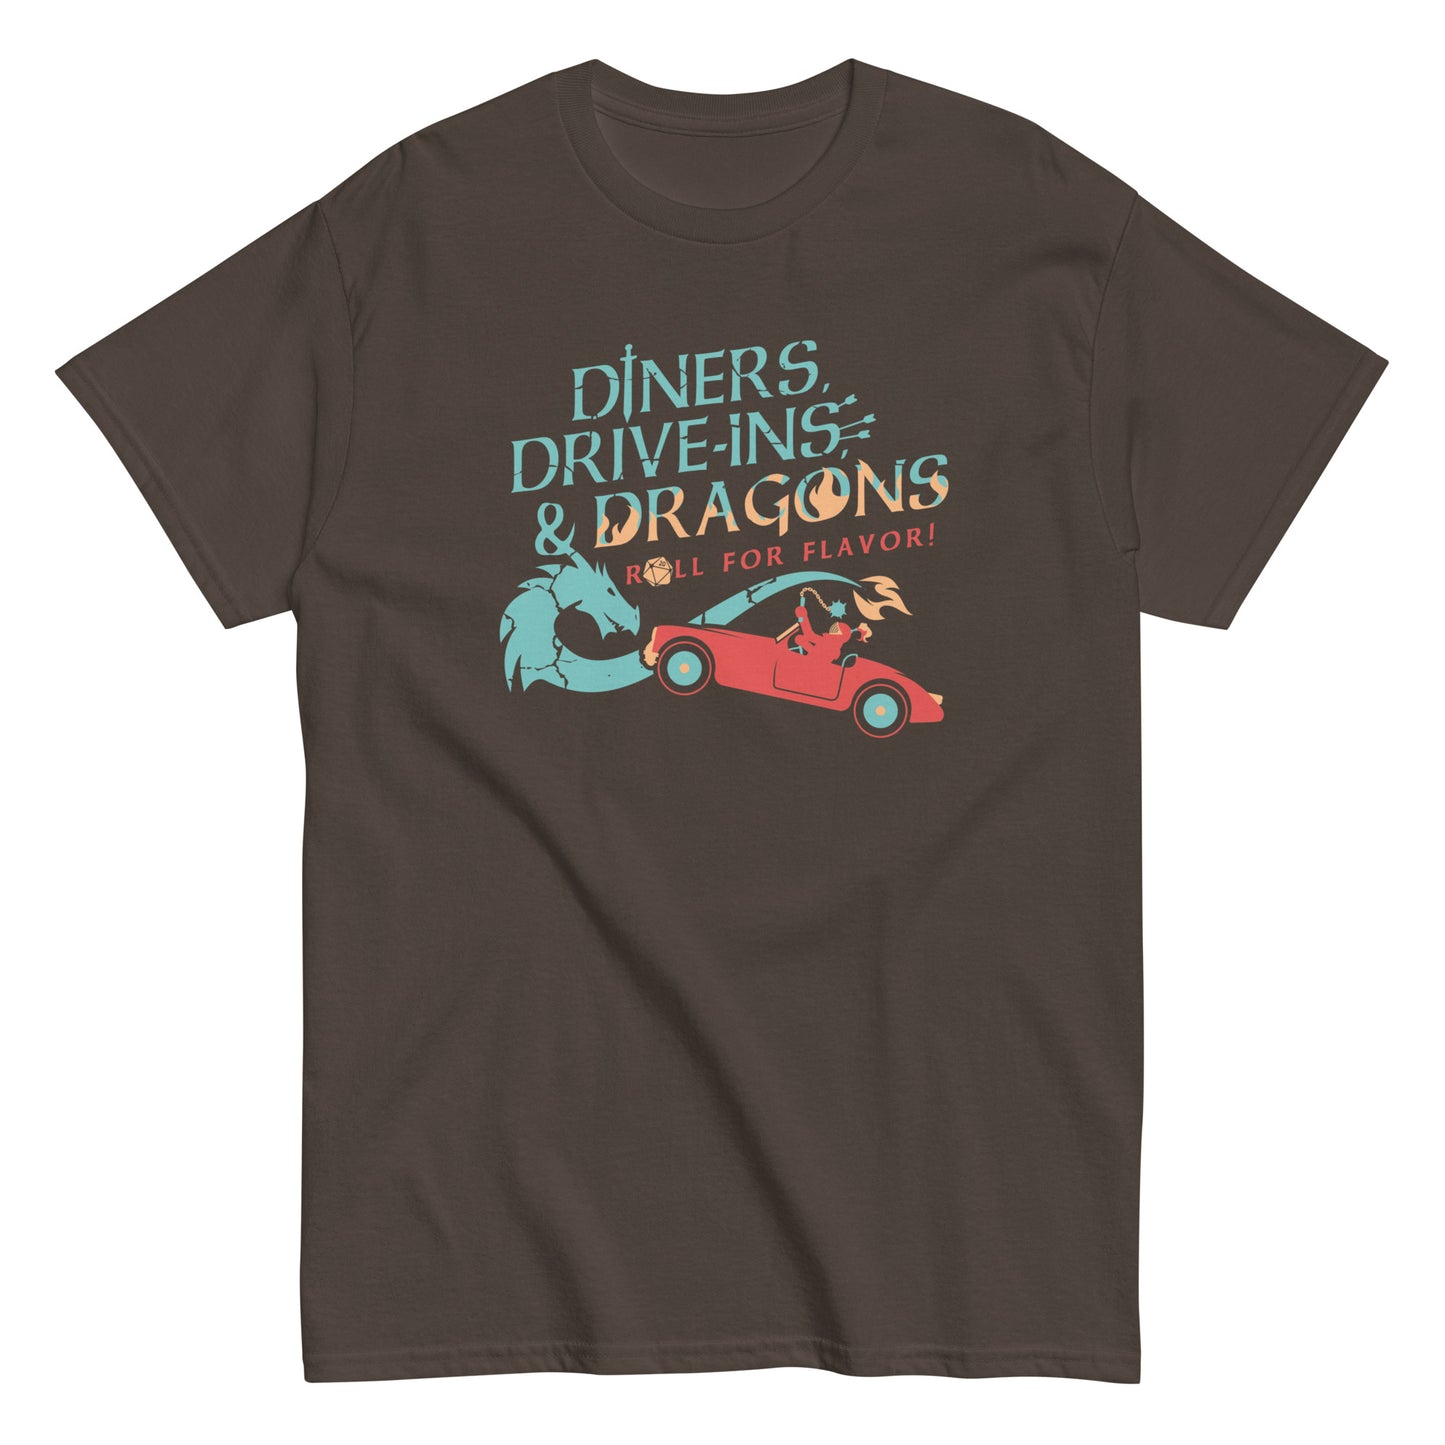 Diners, Drive-ins, & Dragons Men's Classic Tee